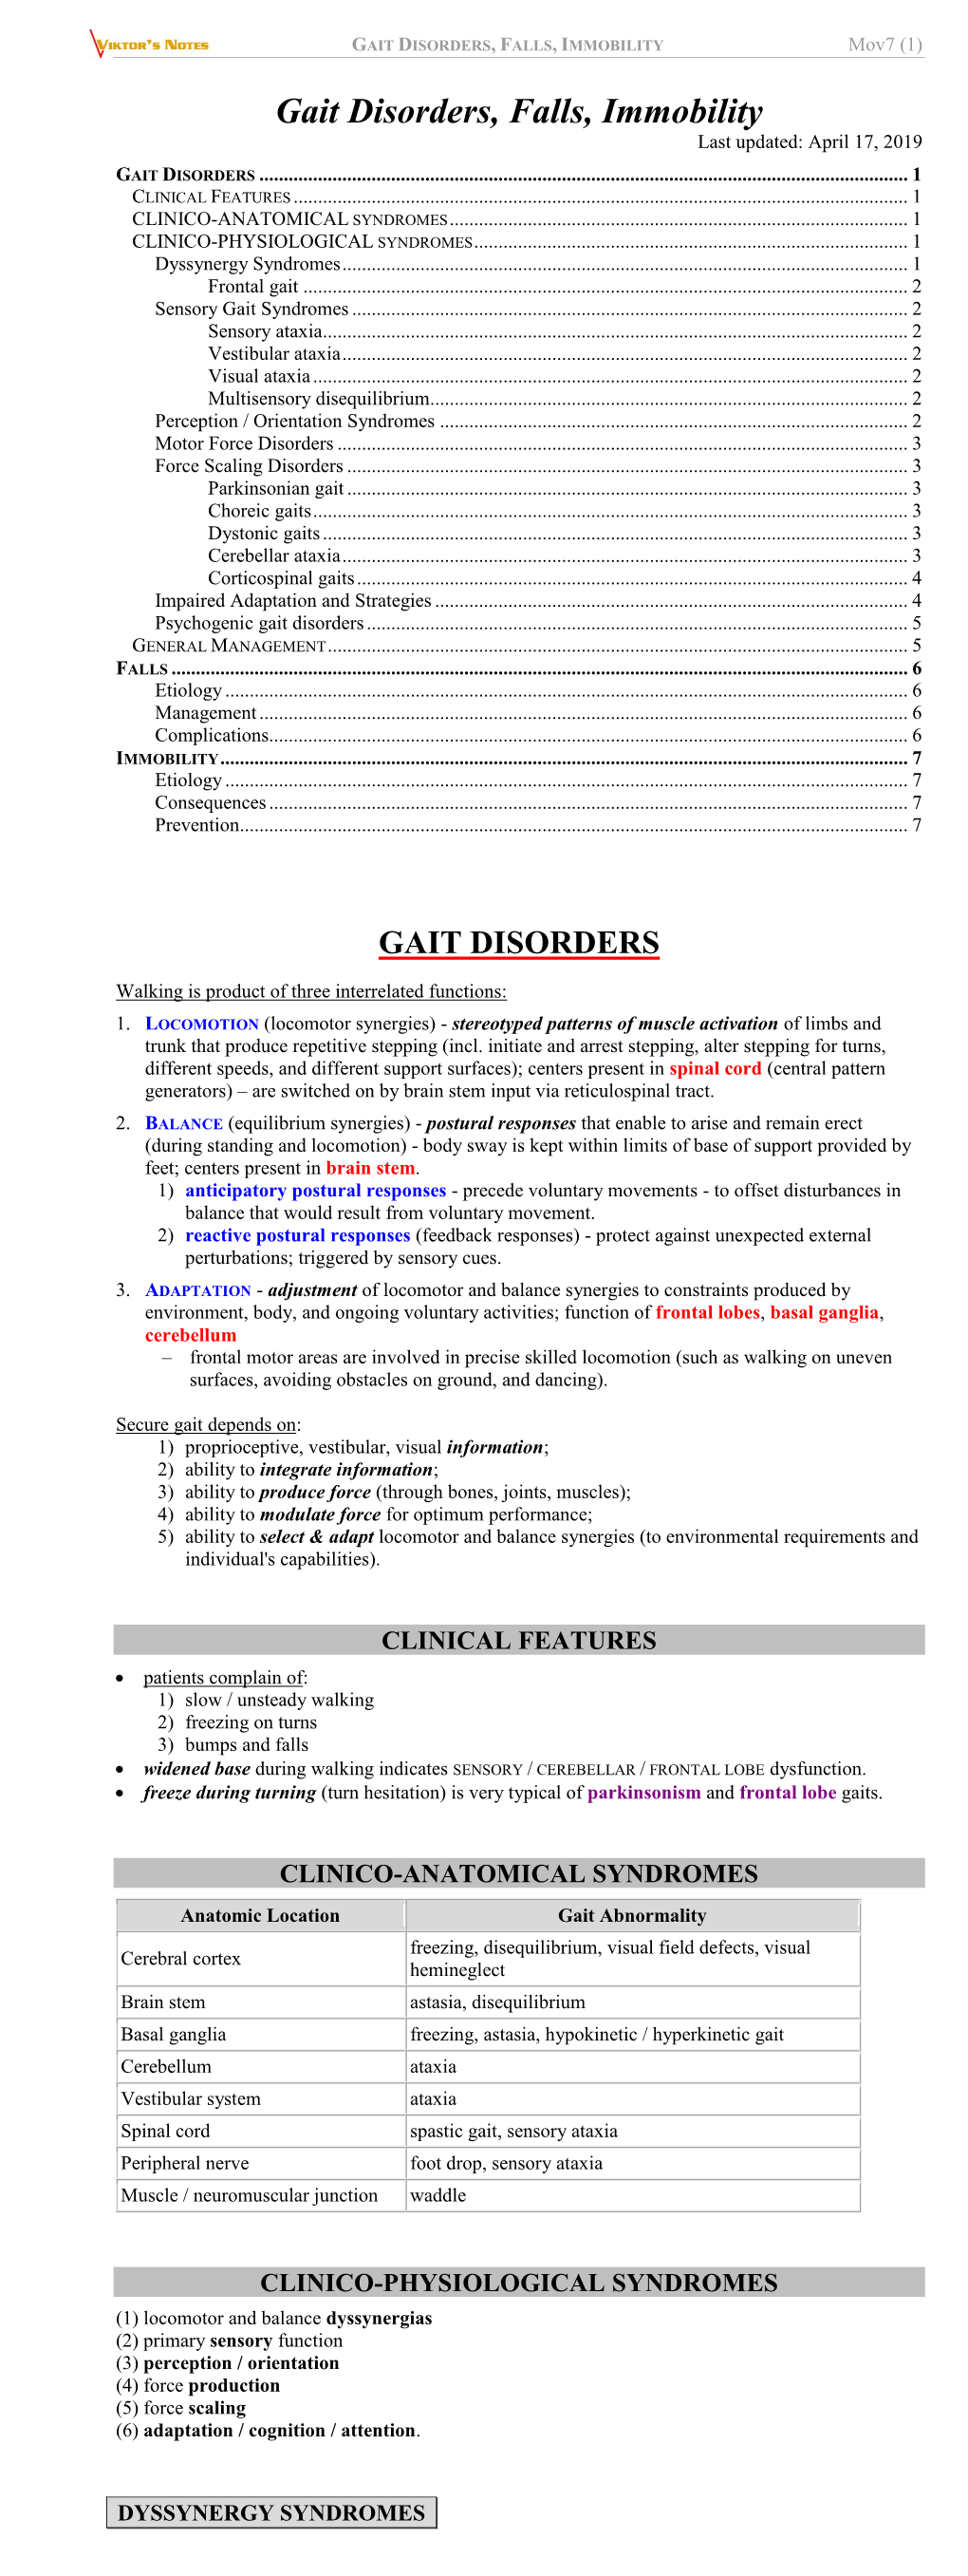 GAIT DISORDERS, FALLS, IMMOBILITY Mov7 (1)